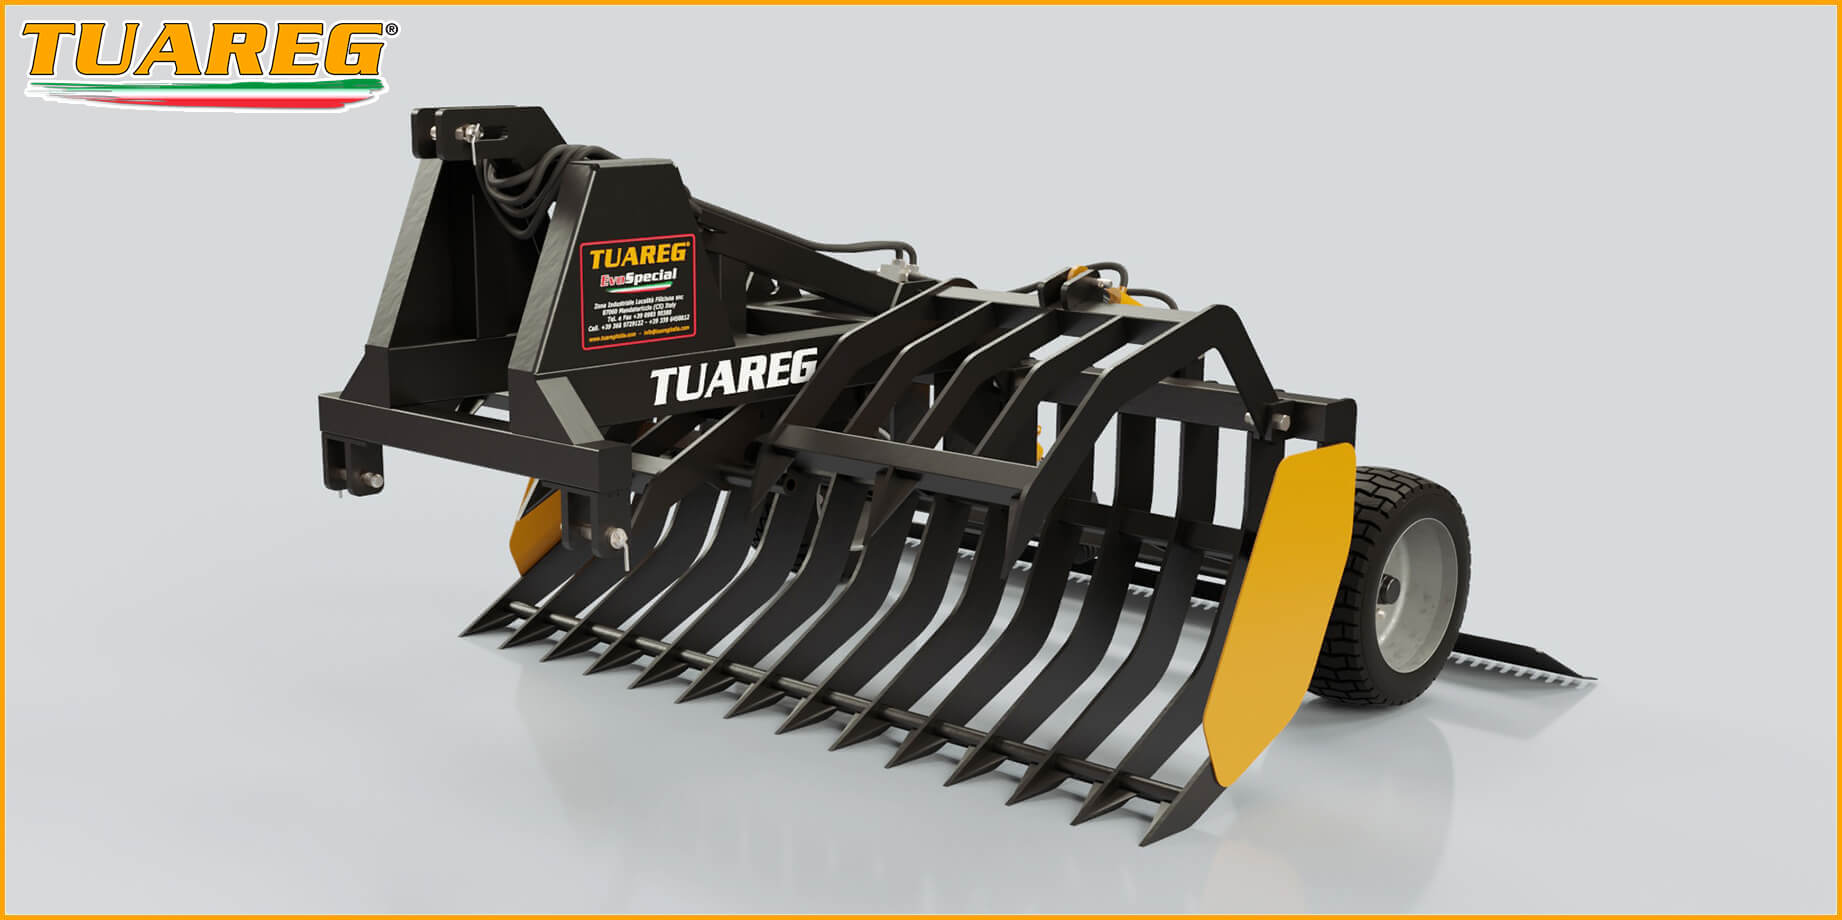 Tuareg EvoSpecial - Beach Cleaning Machine - Attached to a Tractor